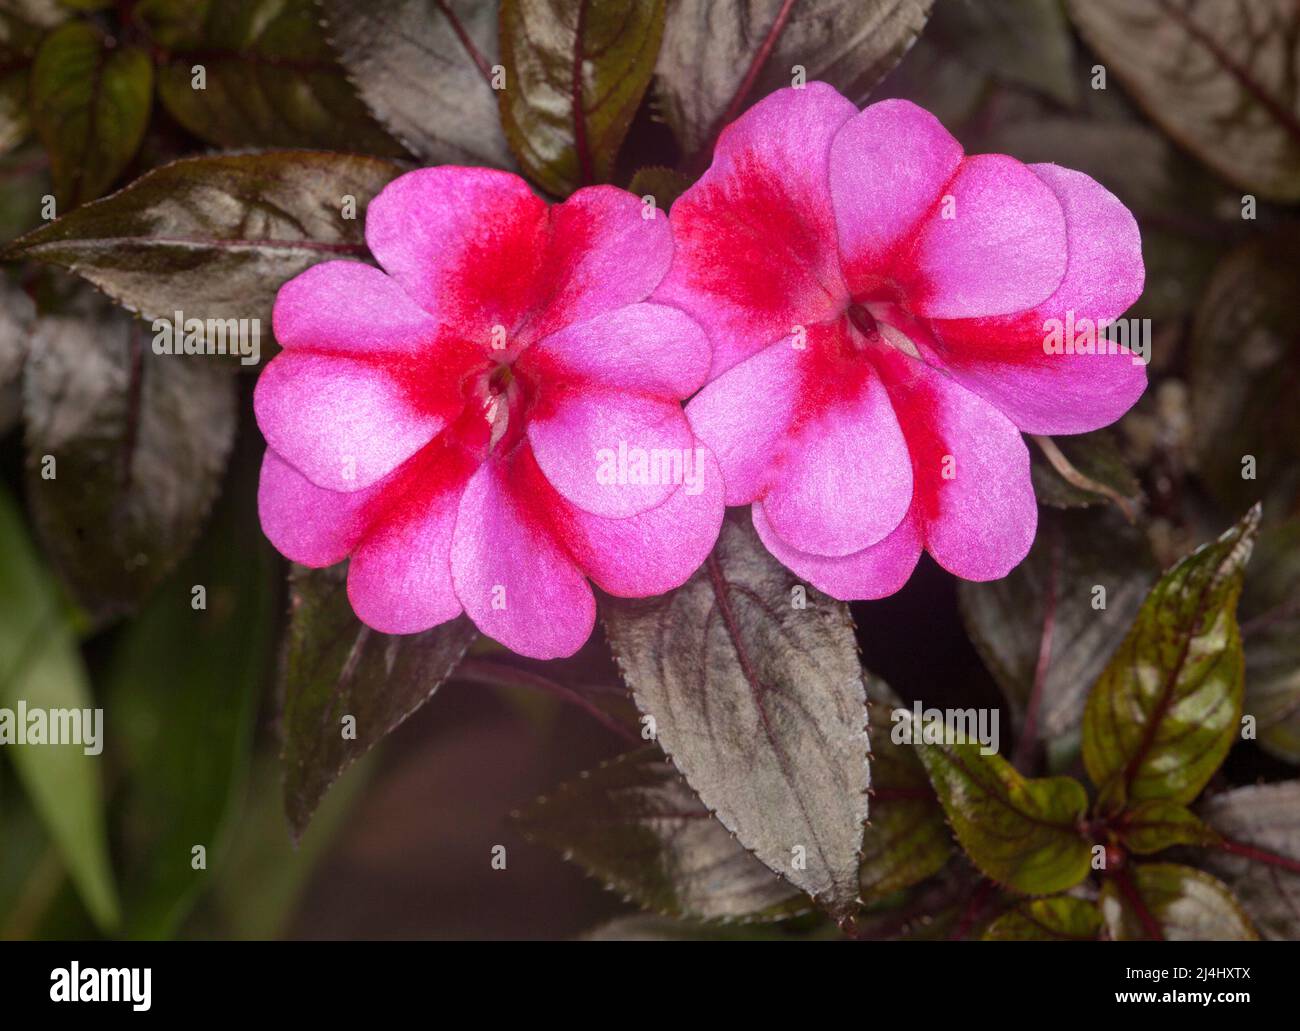 Vivid deep pink and red streaked flowers of Impatiens walleriana New Guinea hybrid on background of dark red leaves in Australia Stock Photo